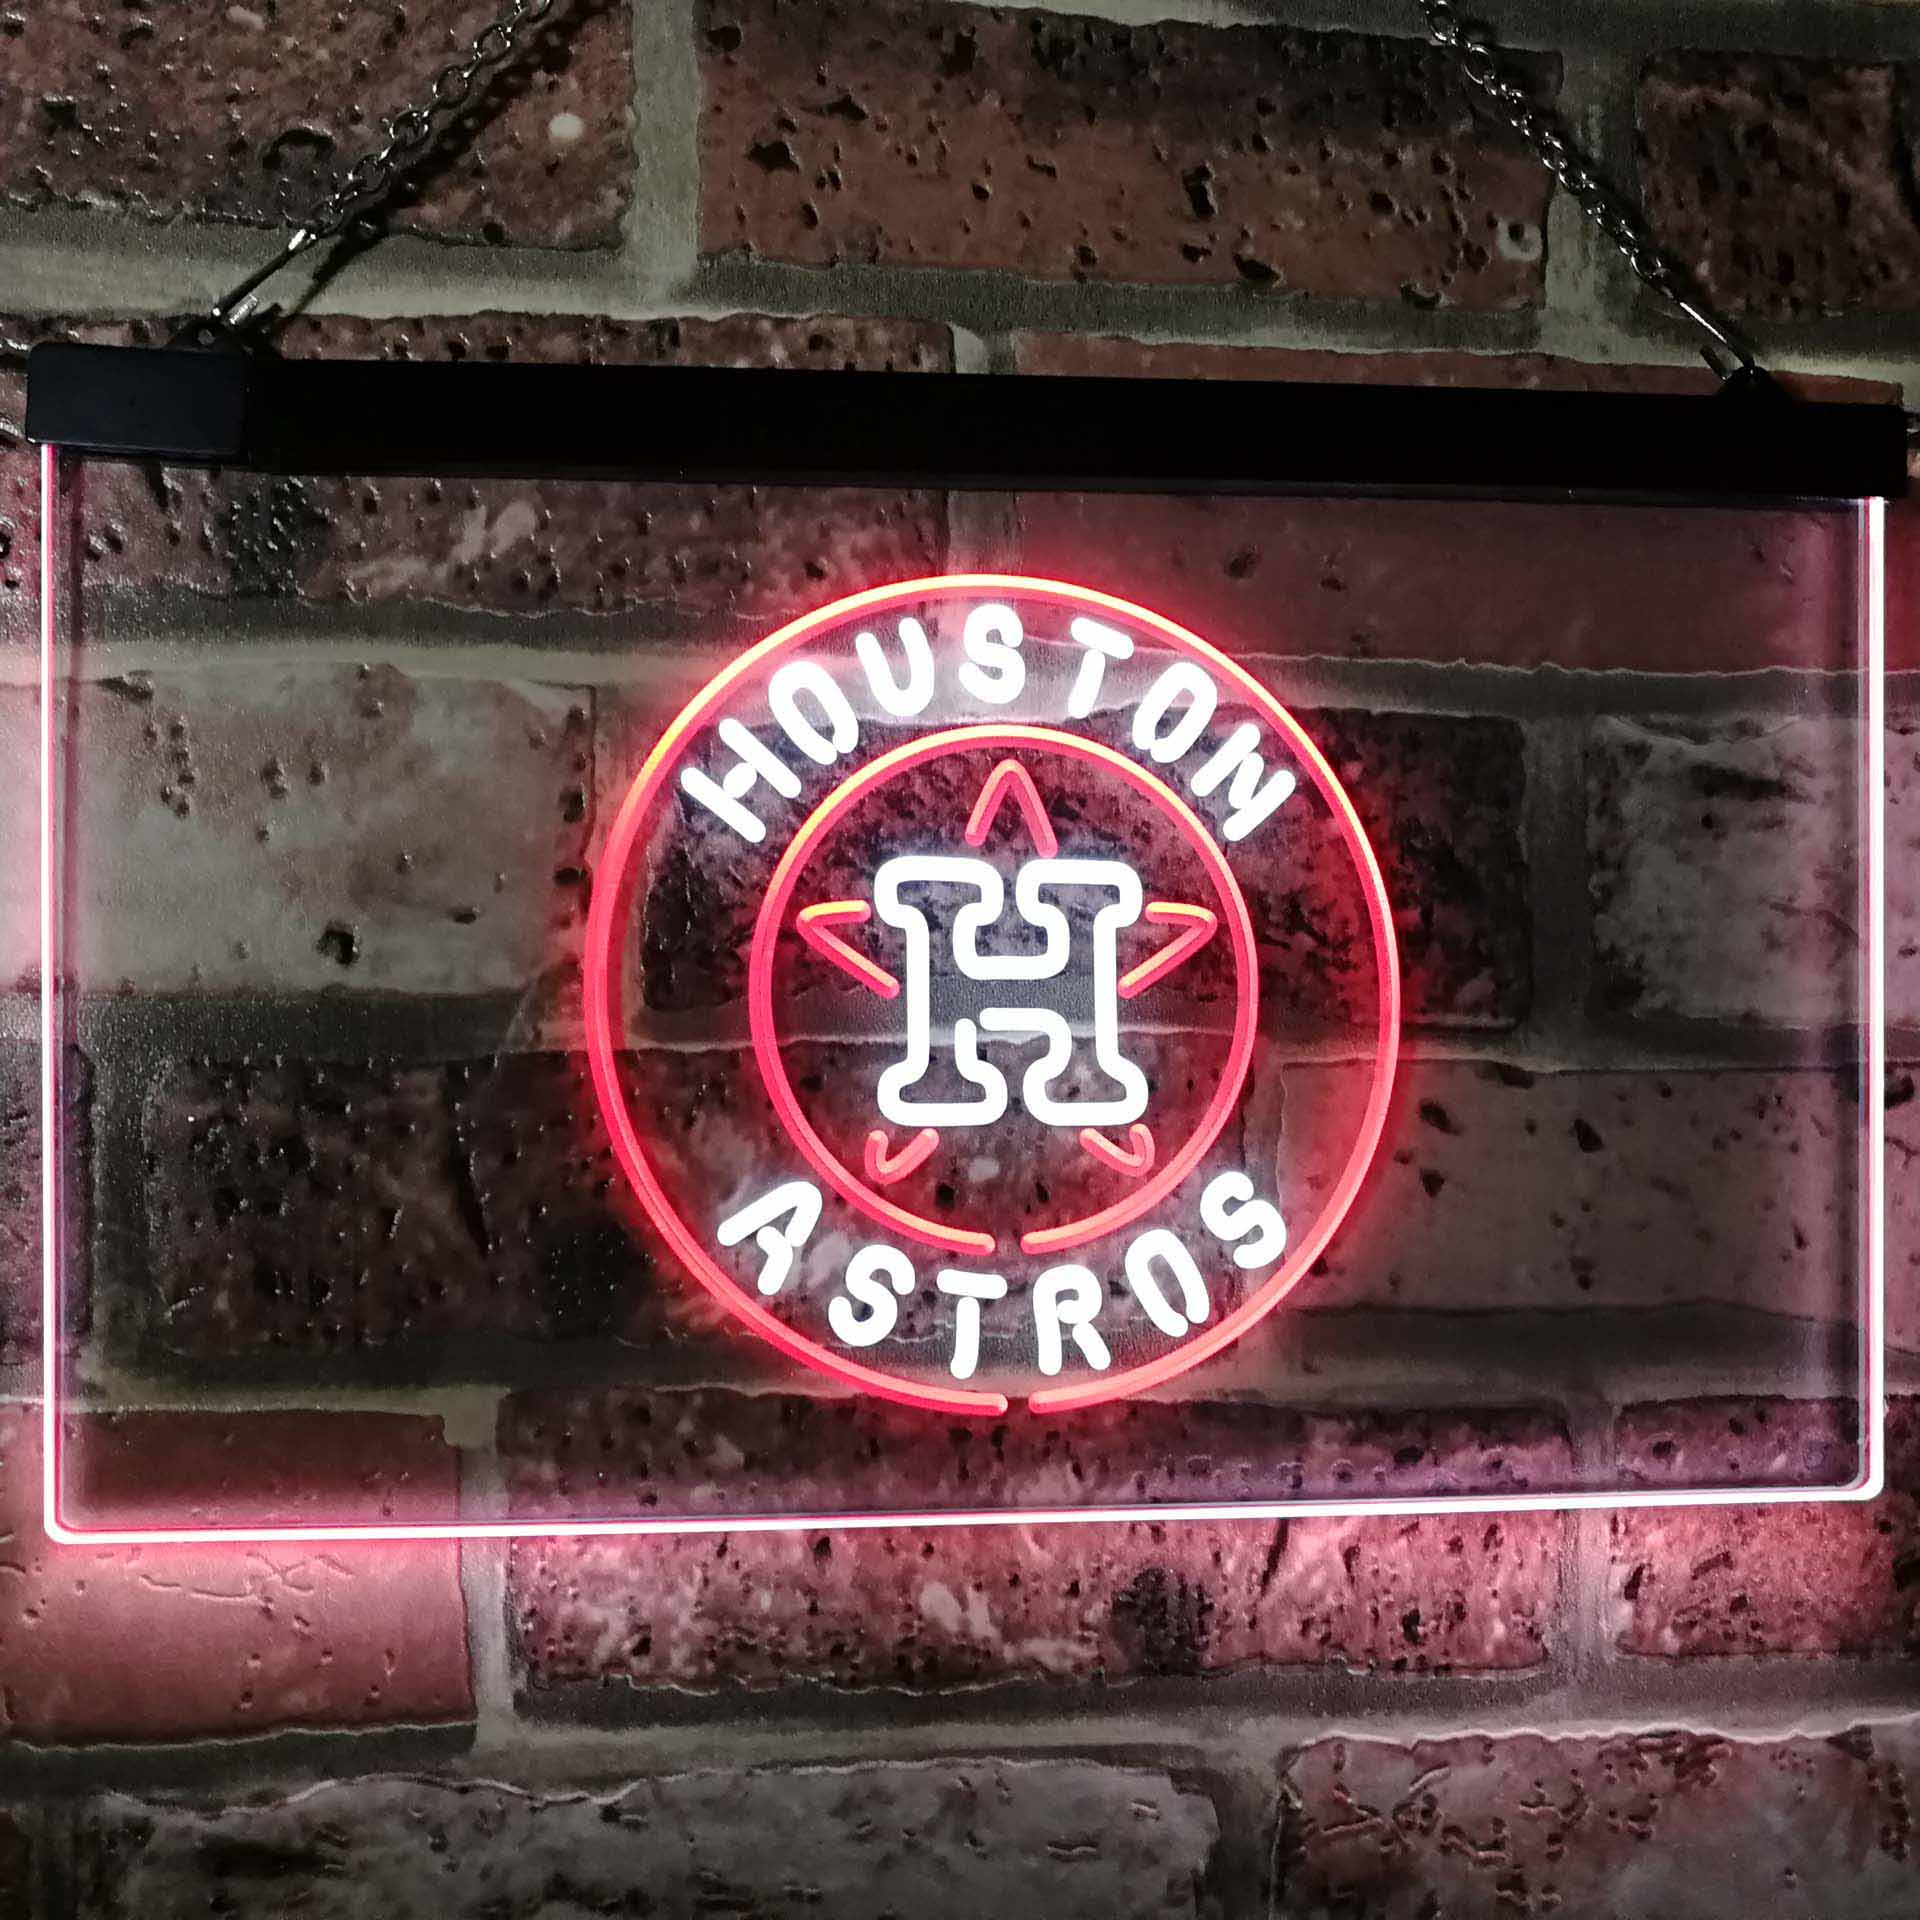 Houston Astros Dual Color LED Neon Sign ProLedSign